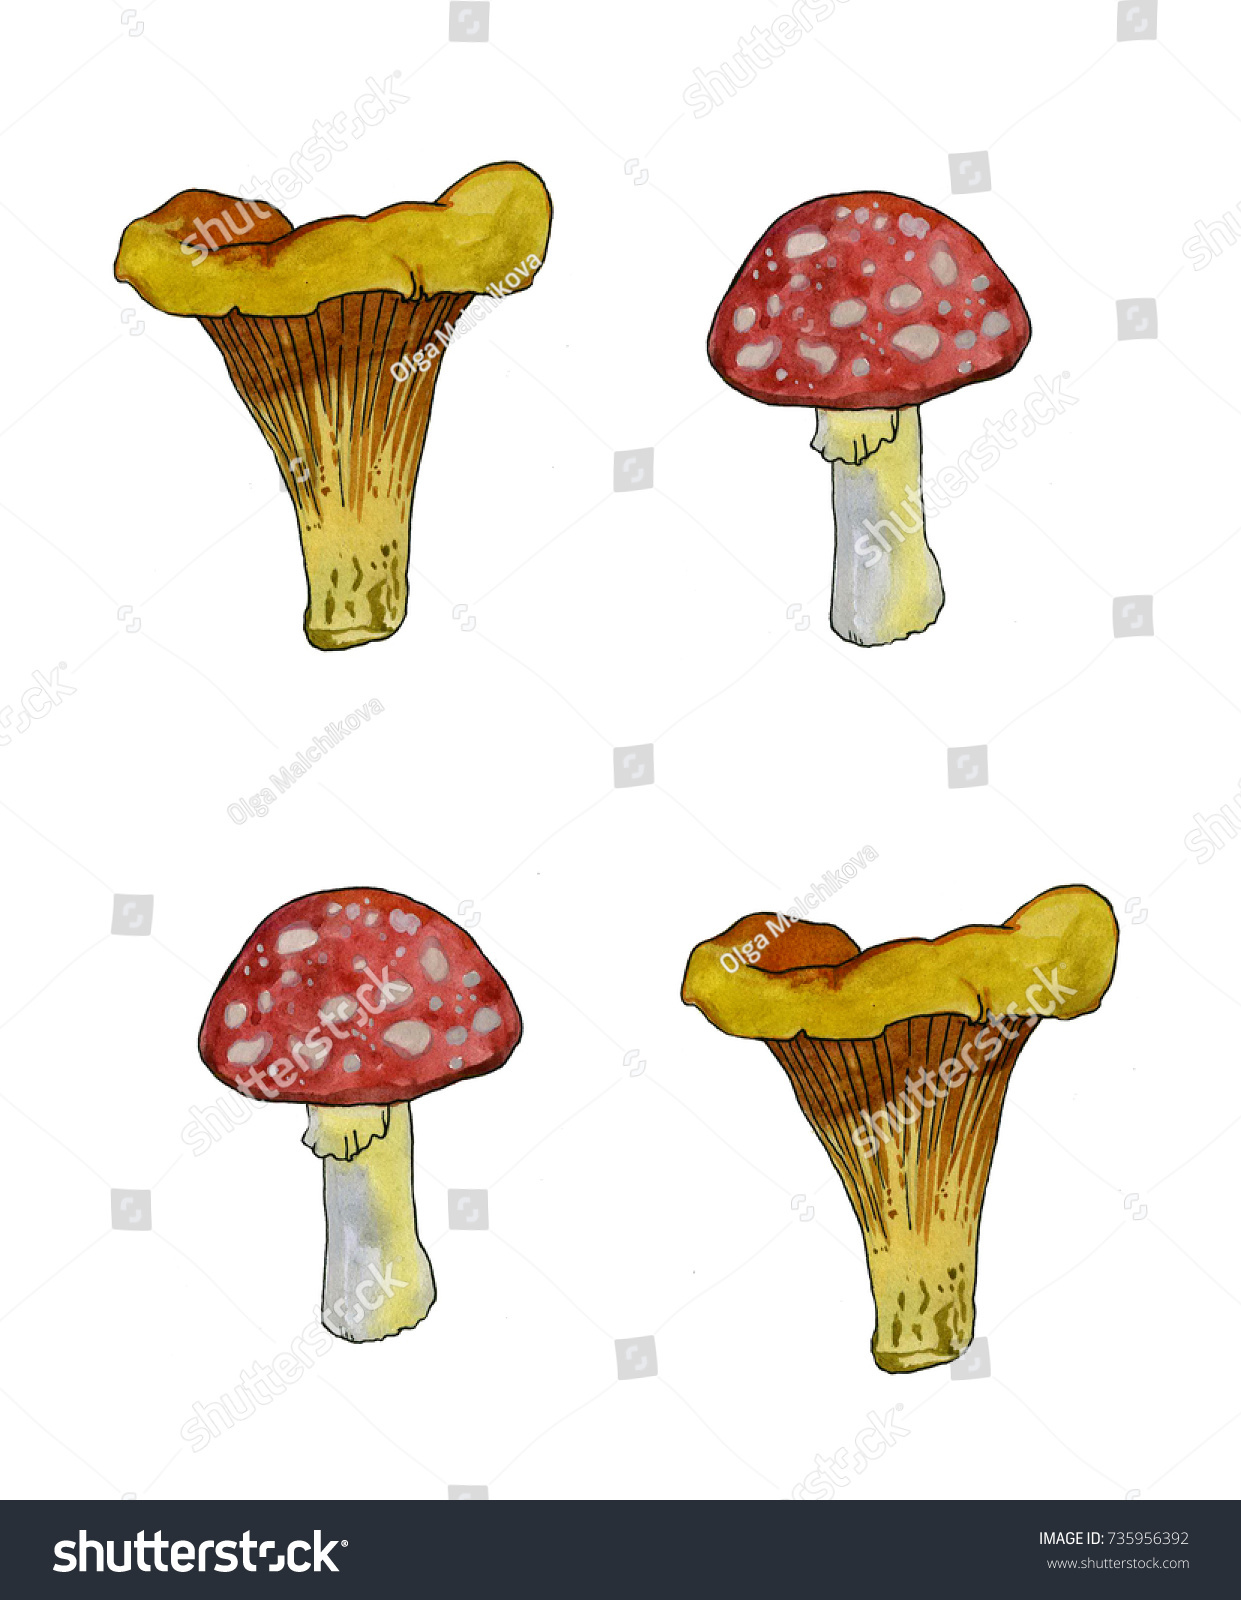 Watercolor Illustrations Mushrooms Sketch Drawing By Stock Illustration ...